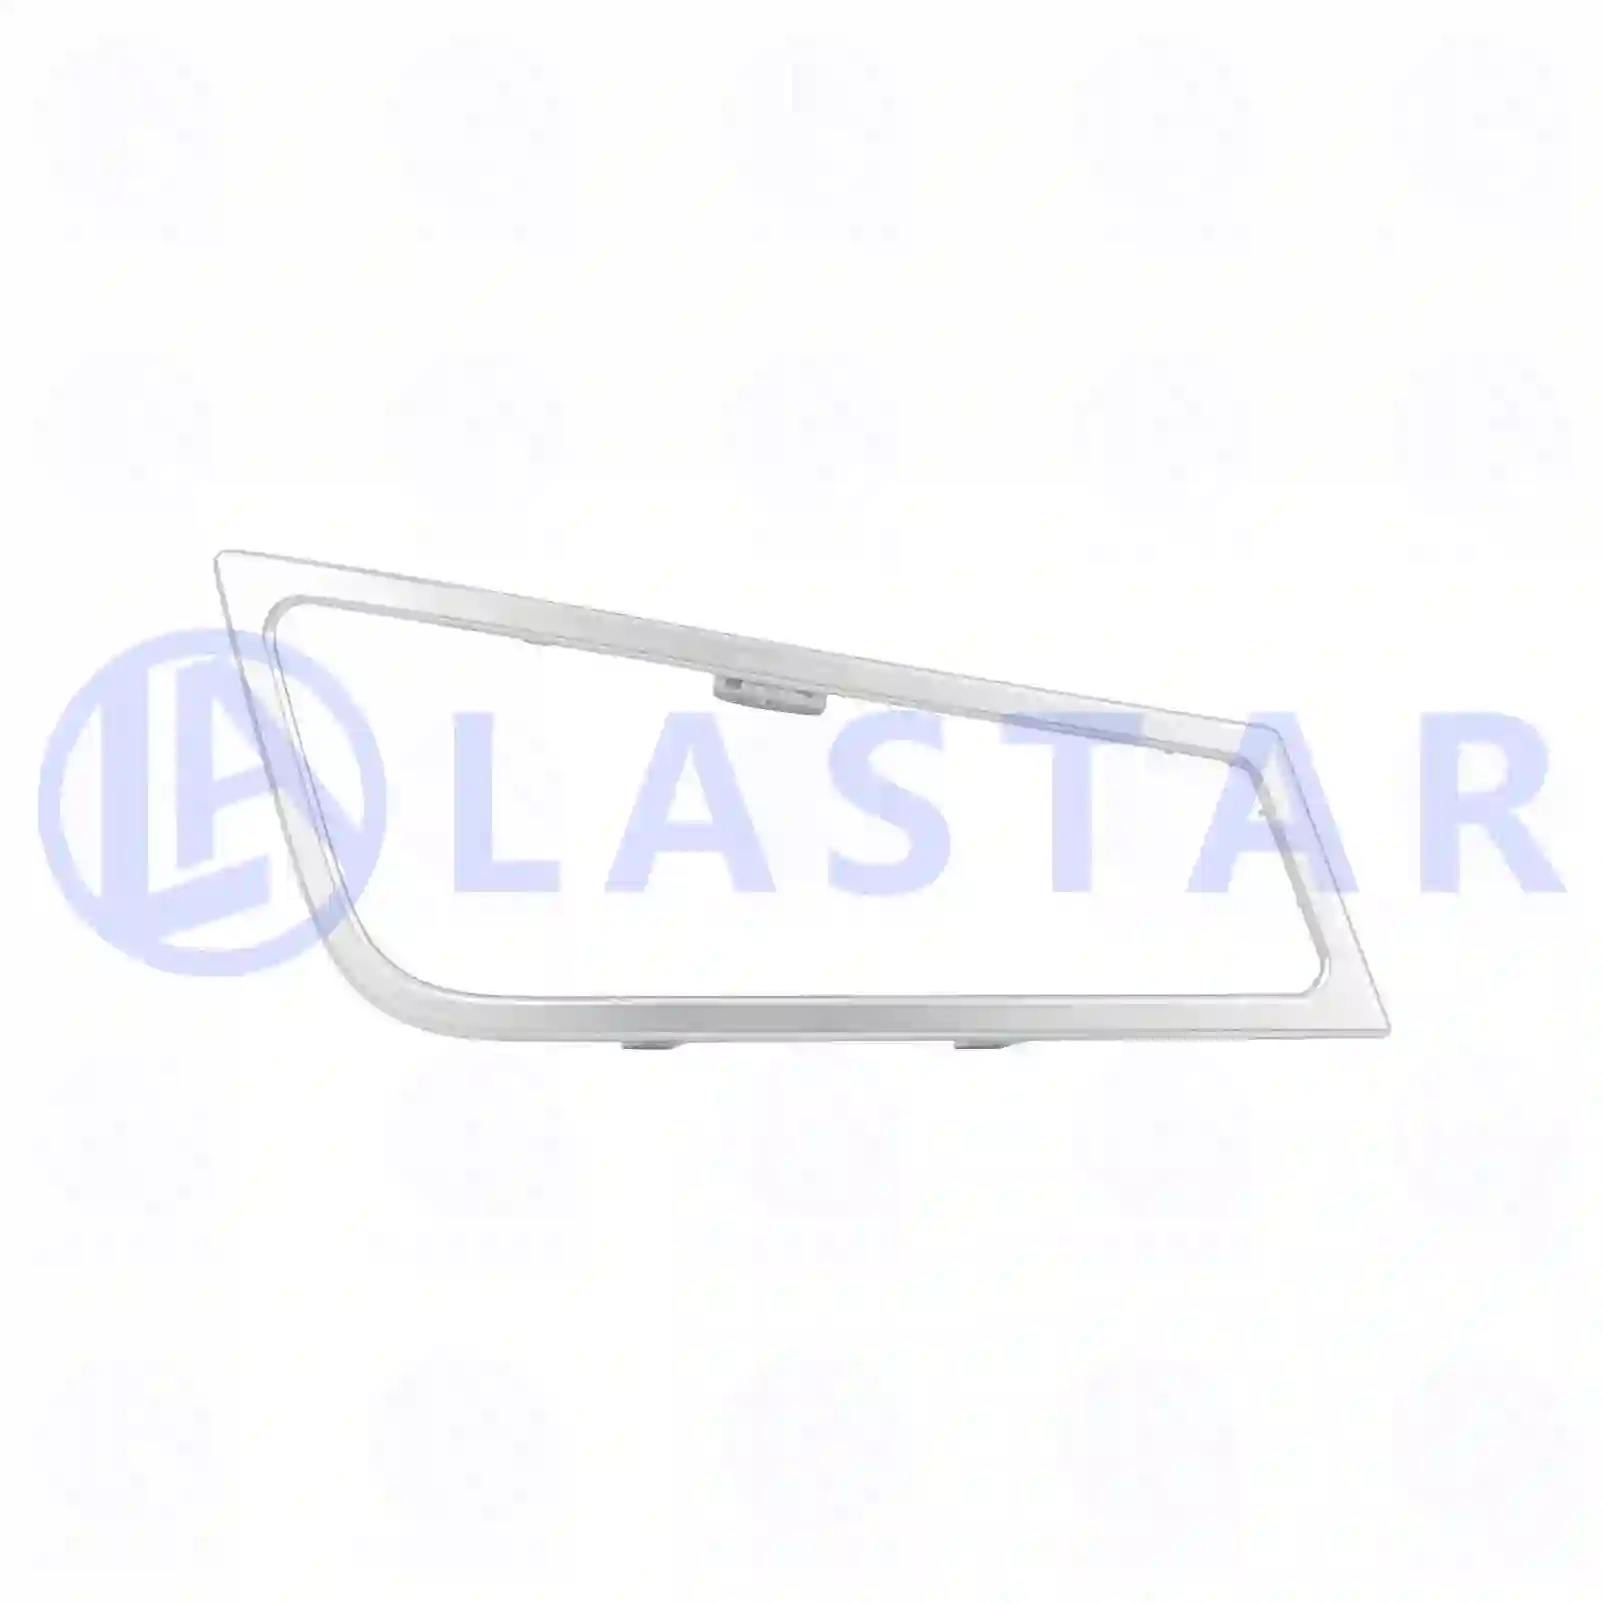 Auxiliary lamp frame, right, silver, 77711059, 21078545 ||  77711059 Lastar Spare Part | Truck Spare Parts, Auotomotive Spare Parts Auxiliary lamp frame, right, silver, 77711059, 21078545 ||  77711059 Lastar Spare Part | Truck Spare Parts, Auotomotive Spare Parts